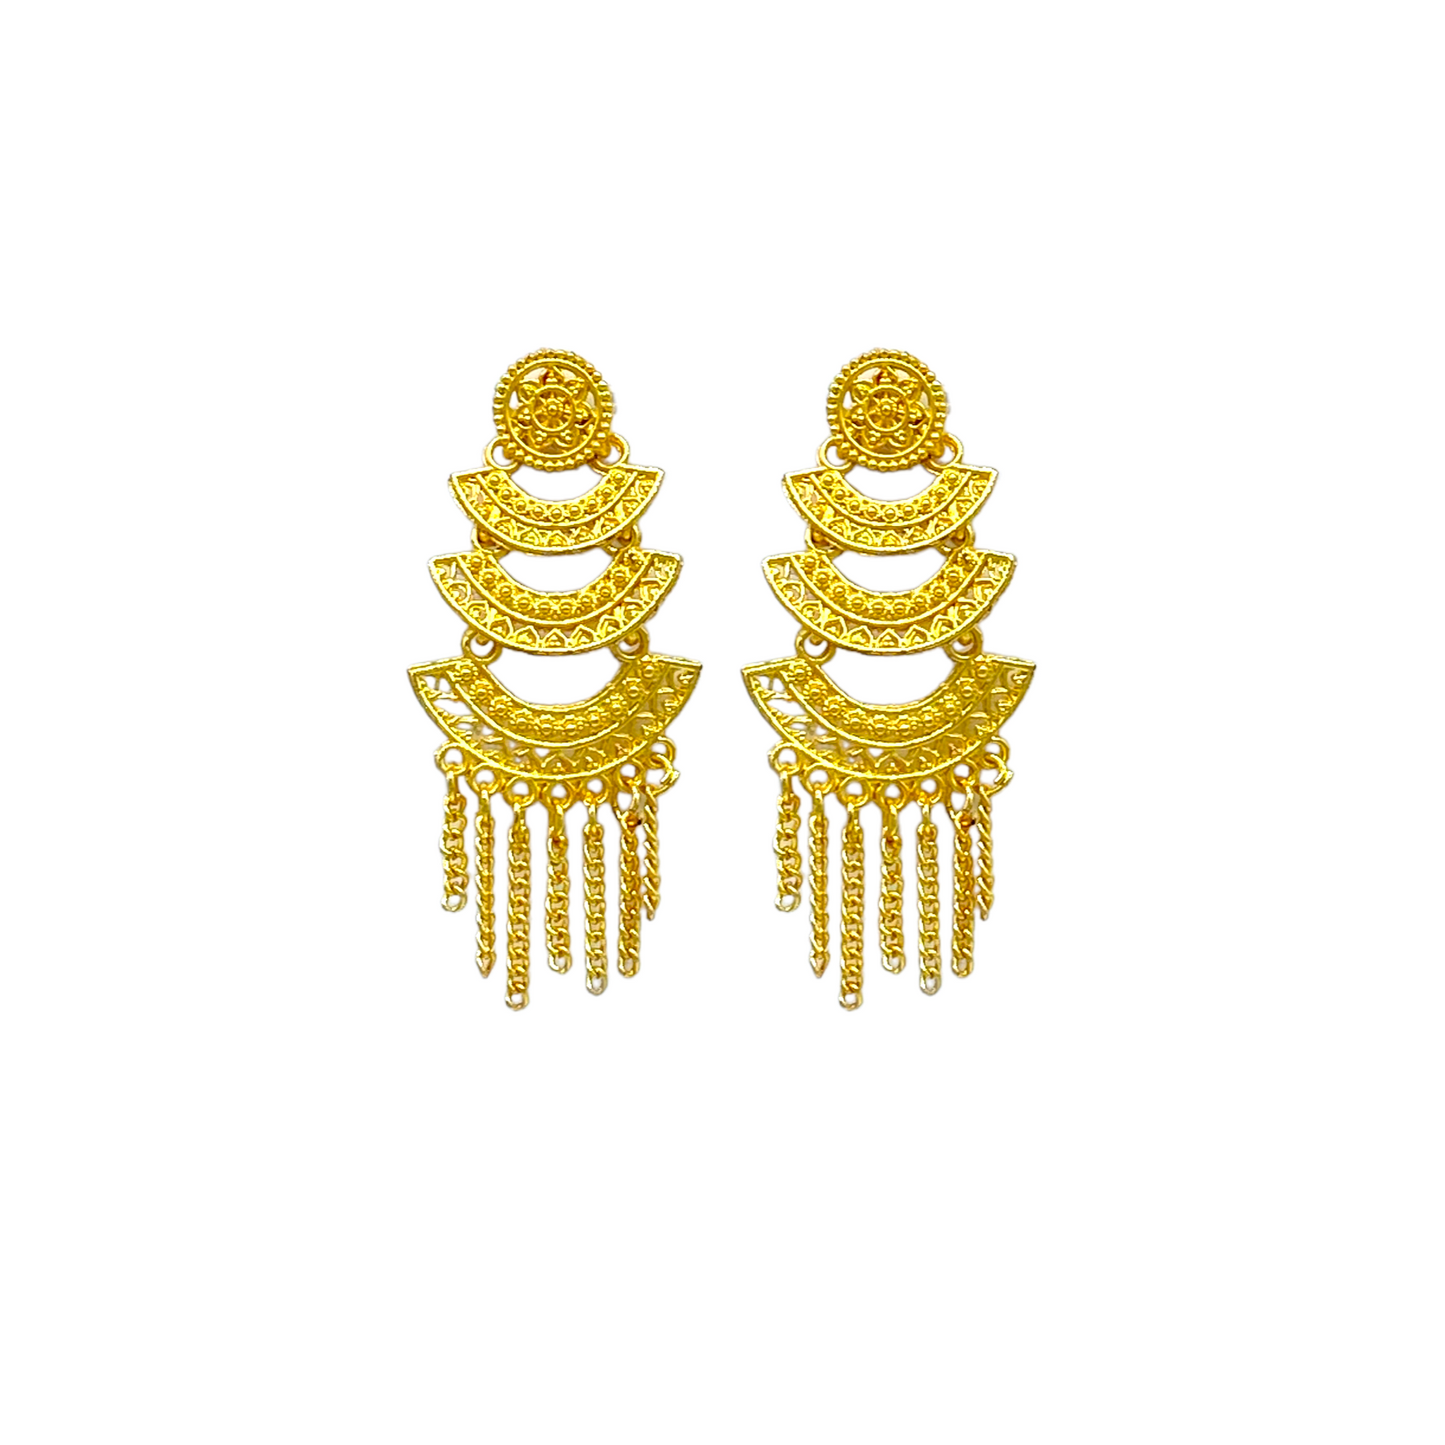 Gold Earrings with small triple layered curved design and chain tassel